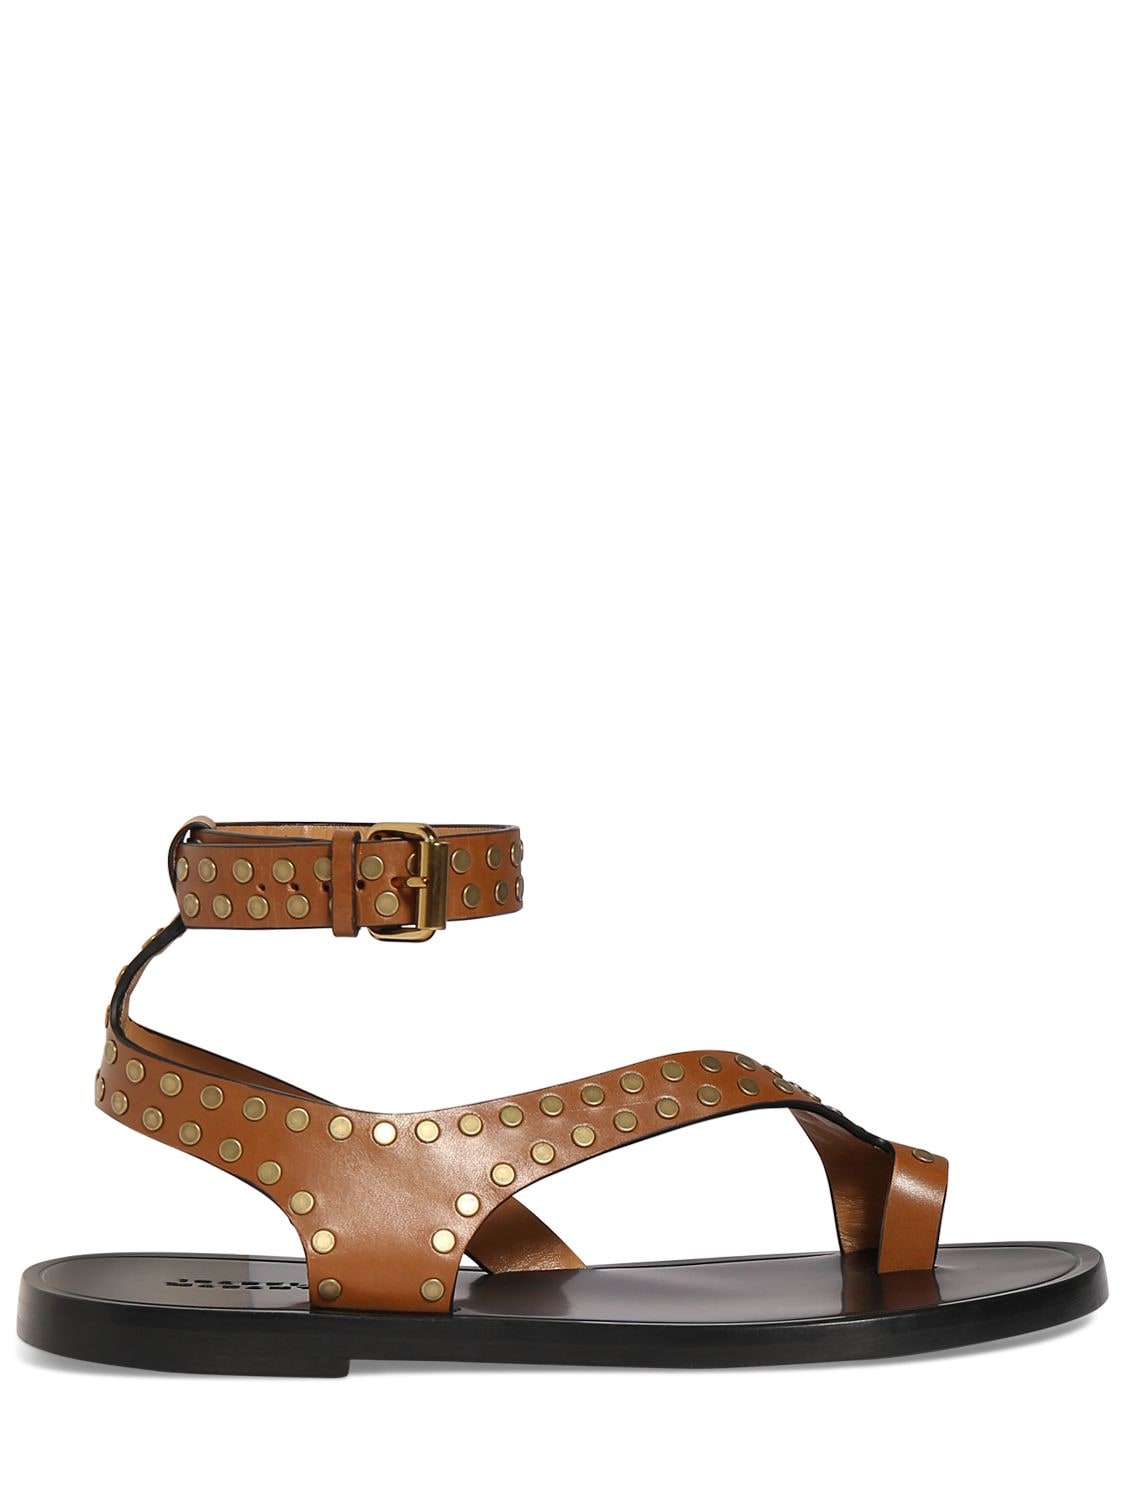 Isabel Marant Jiona Leather Sandals In Tan